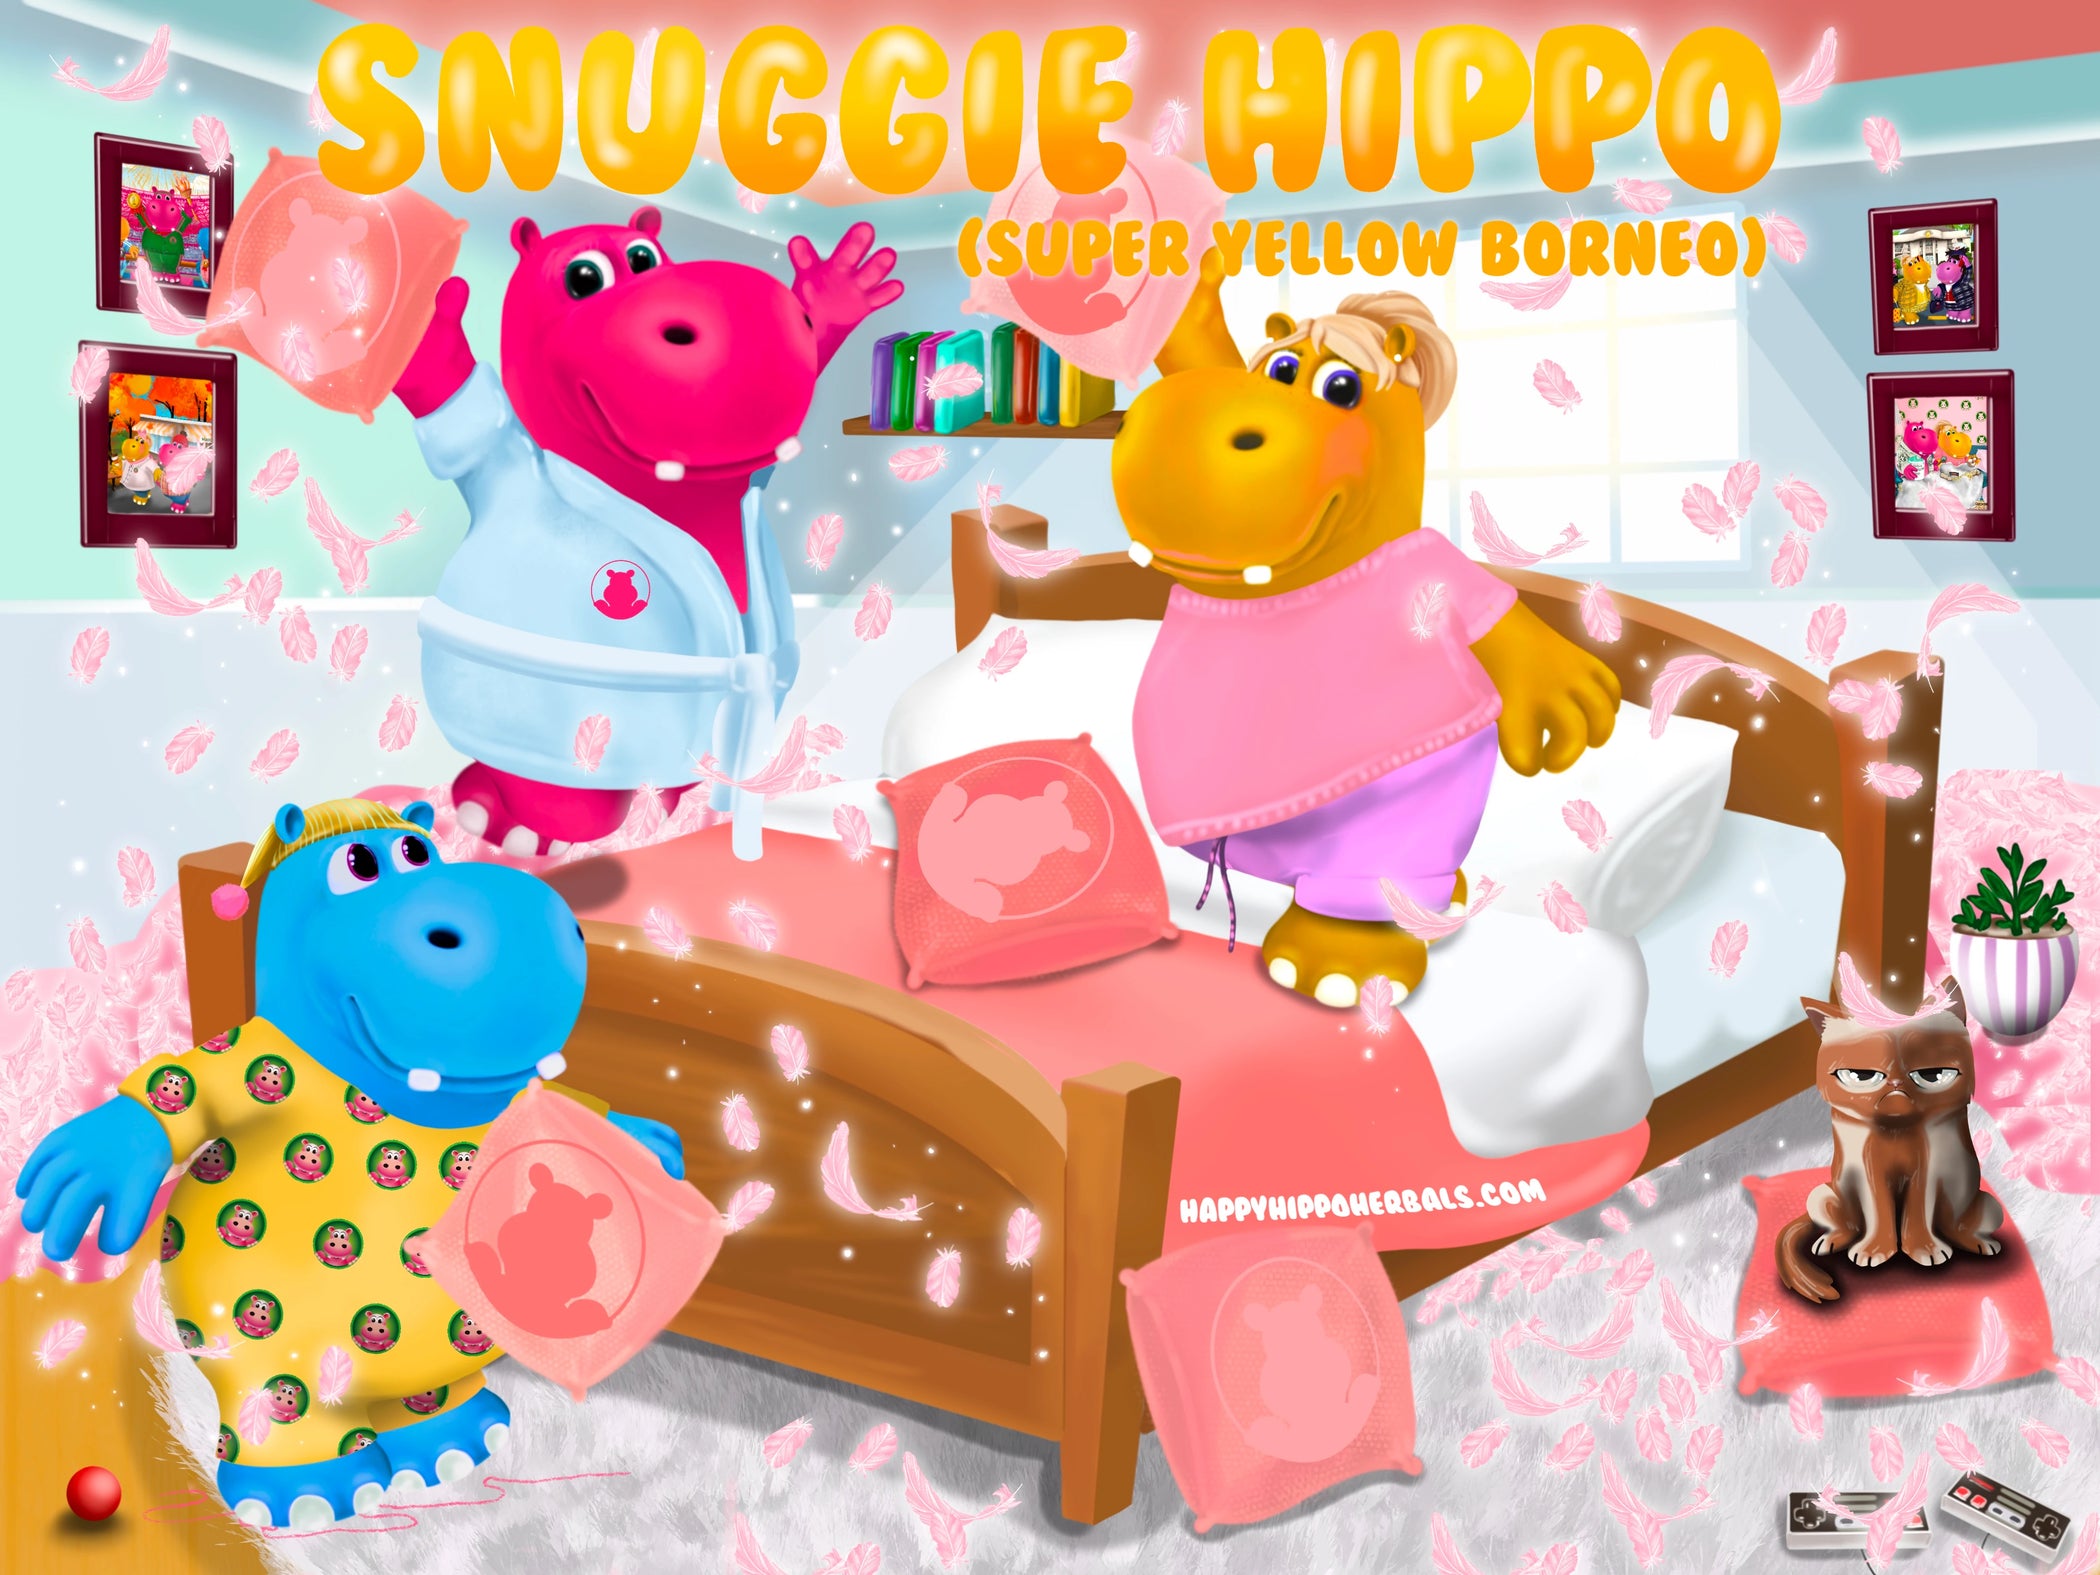 Graphic designed image depicting Puddles the Hippo having a pillow-fight with a couple of hippo friends while using Yellow Borneo Kratom Powder (Snuggie Hippo)